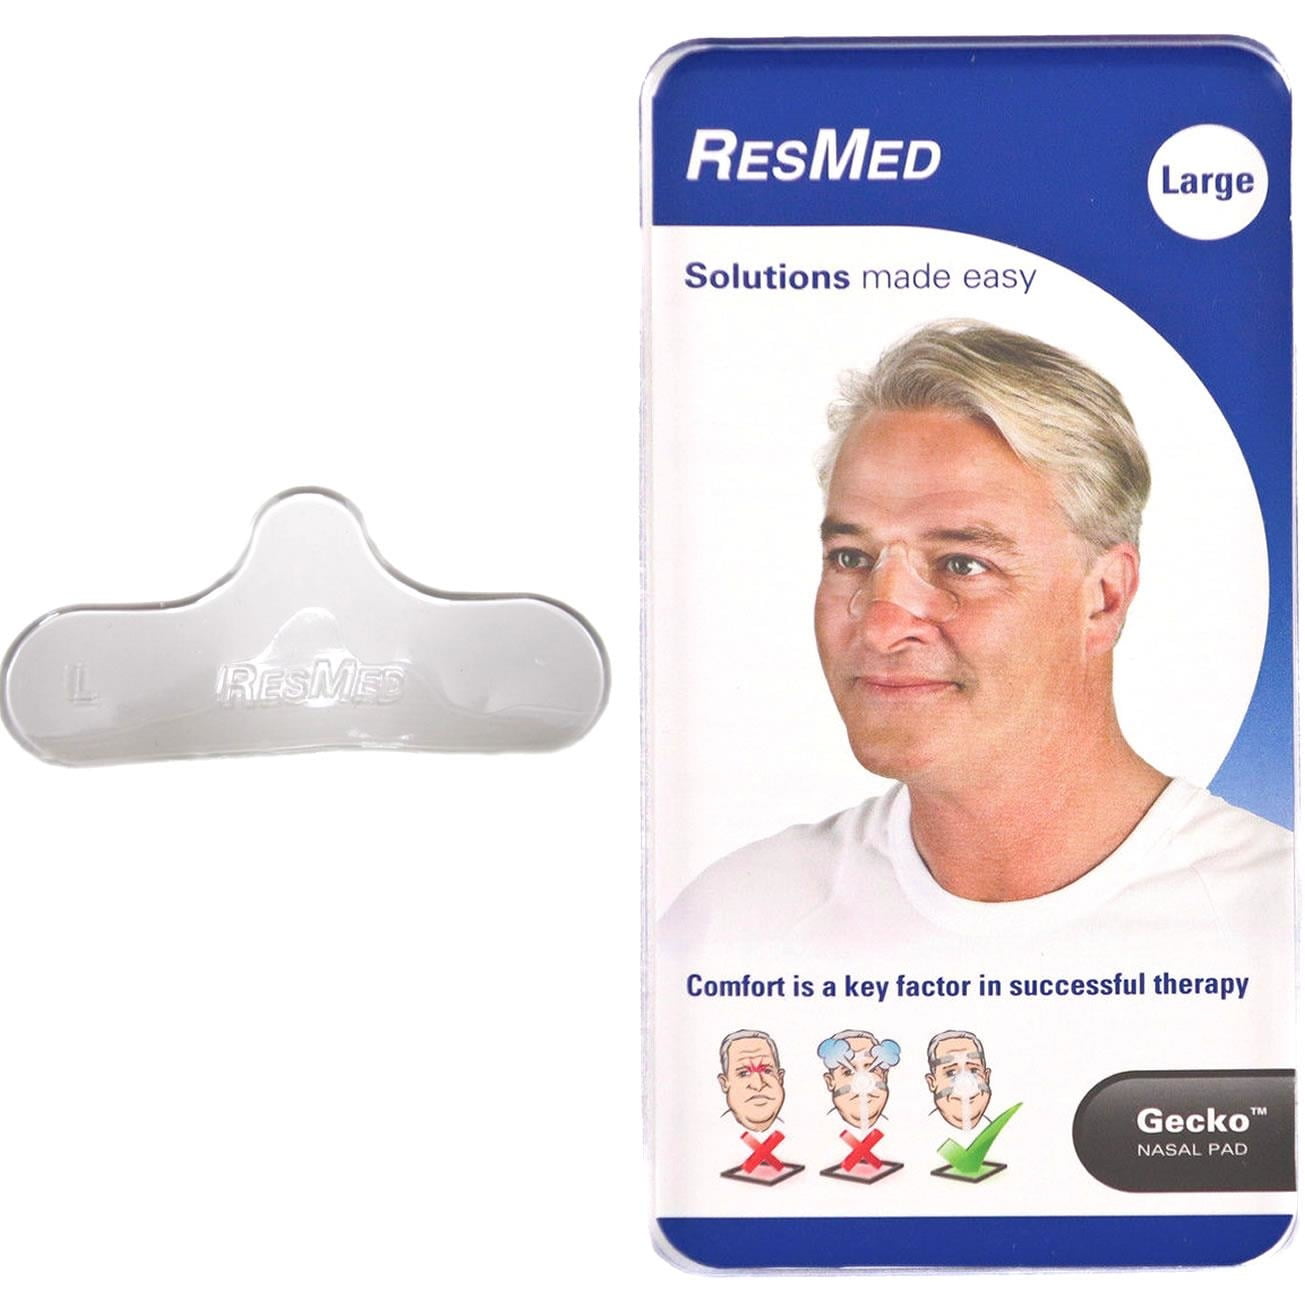 Resmed Cpap Nasal Pad Large Skin Mask Face Gel Soft Cushion Nose Therapy Comfort Ebay 1124